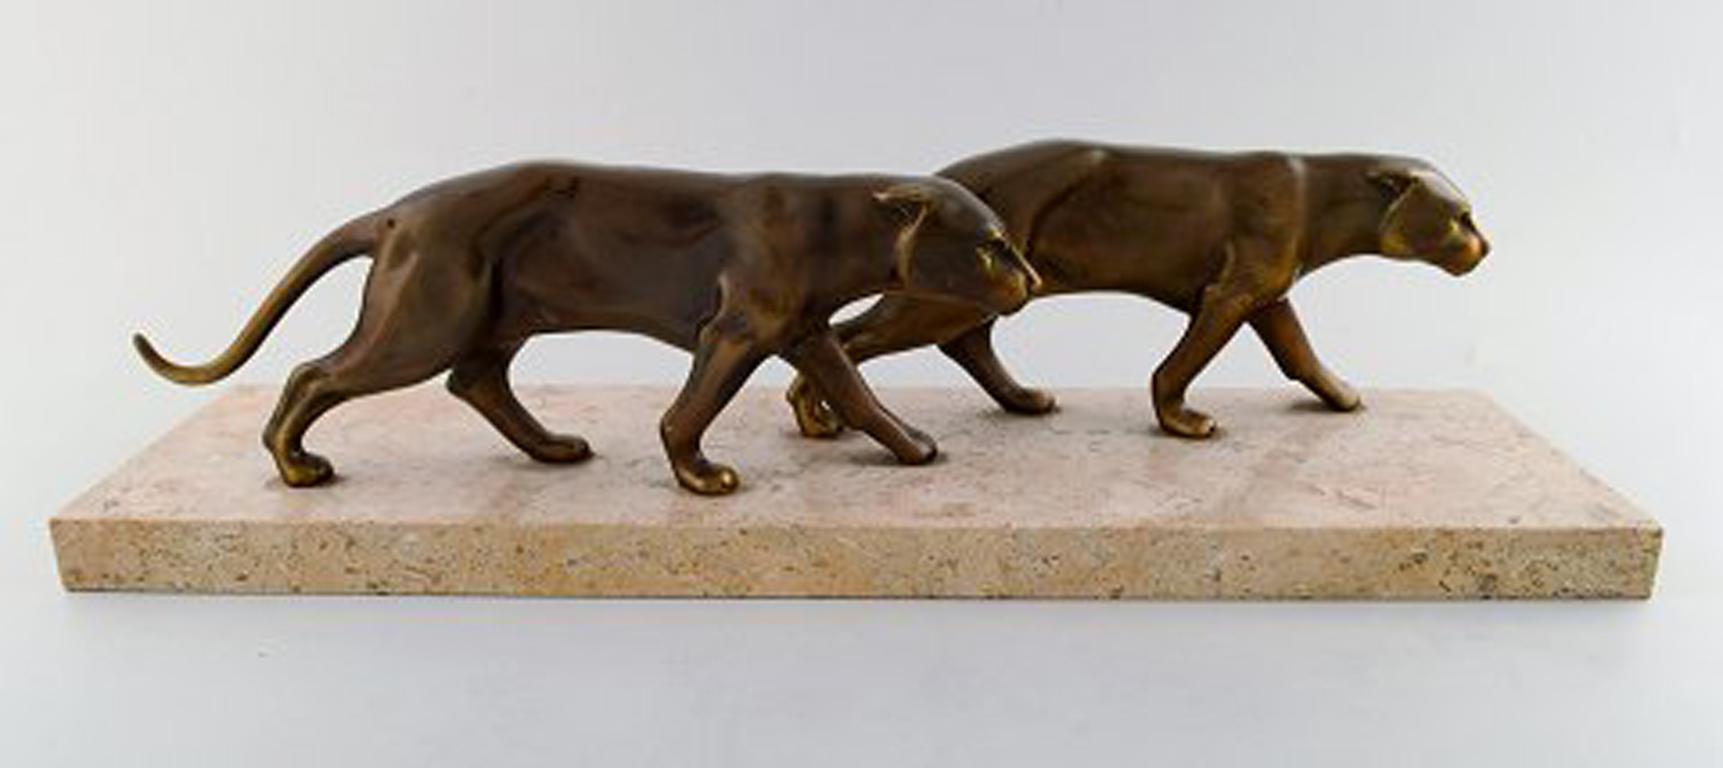 Large Art Deco figure of two panthers in patinated bronze on marble base. 1930s-1940s. Nice patina.
In very good condition.
Measures: 55 x 16 x 14 cm.